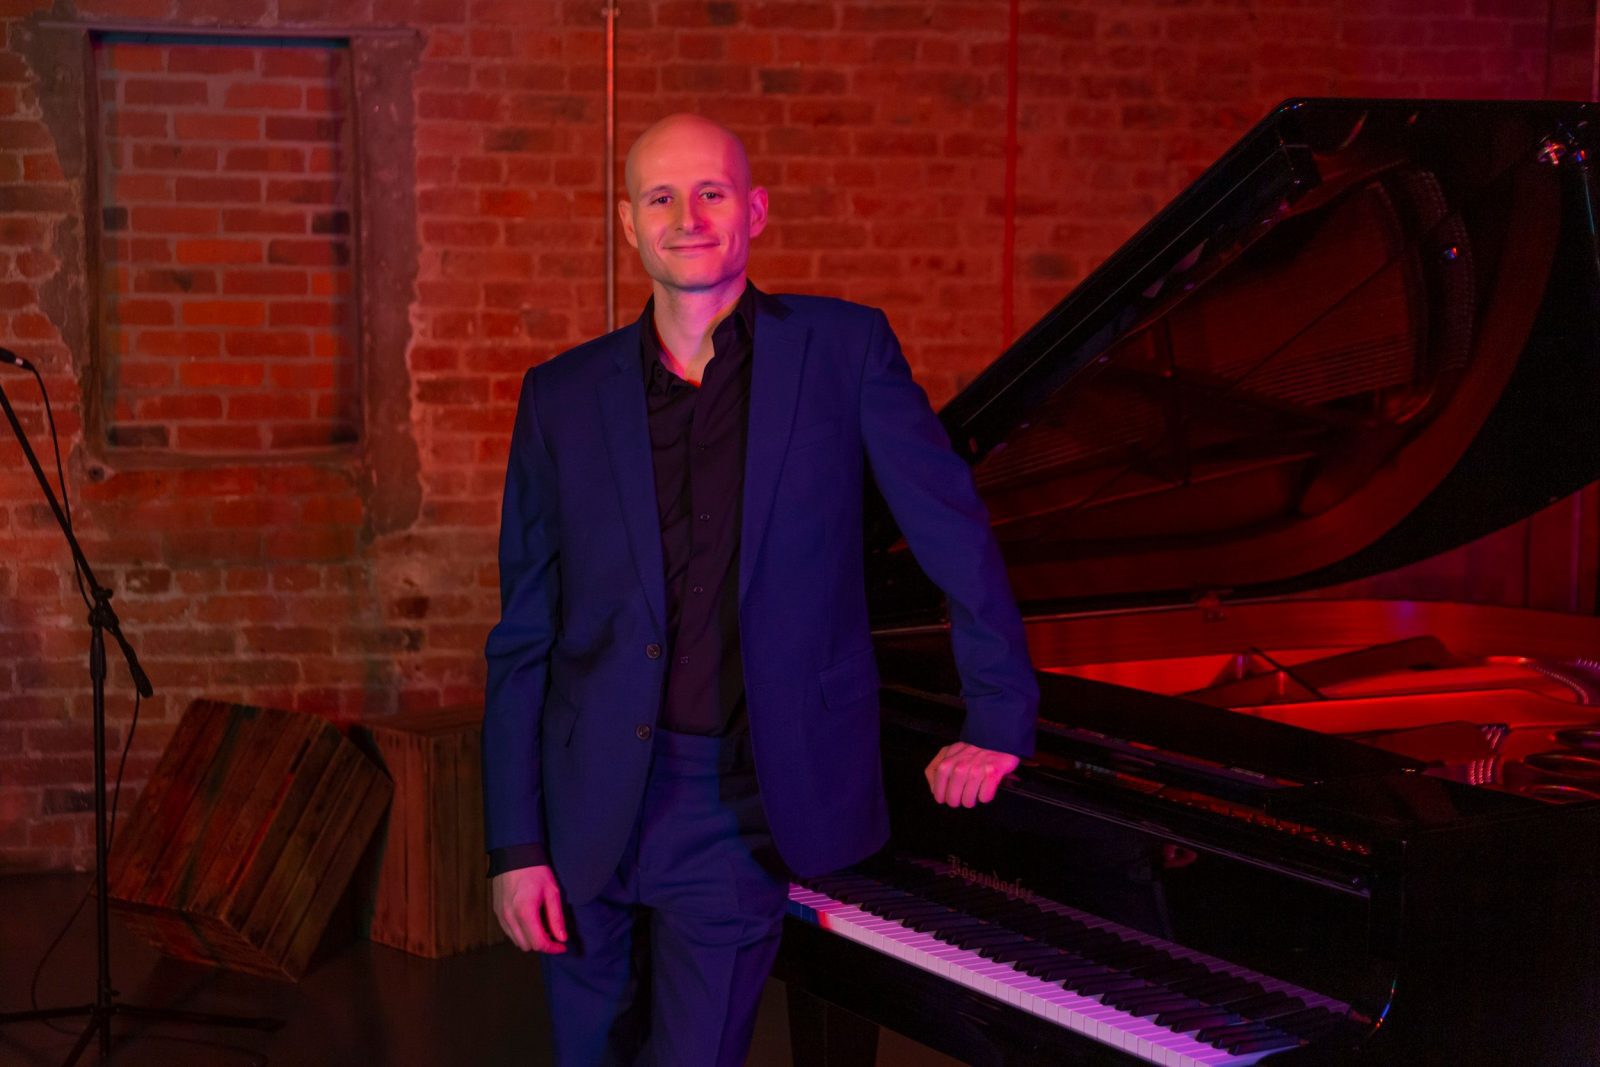 A New York-style piano bar and cabaret lounge is opening in Manchester, The Manc